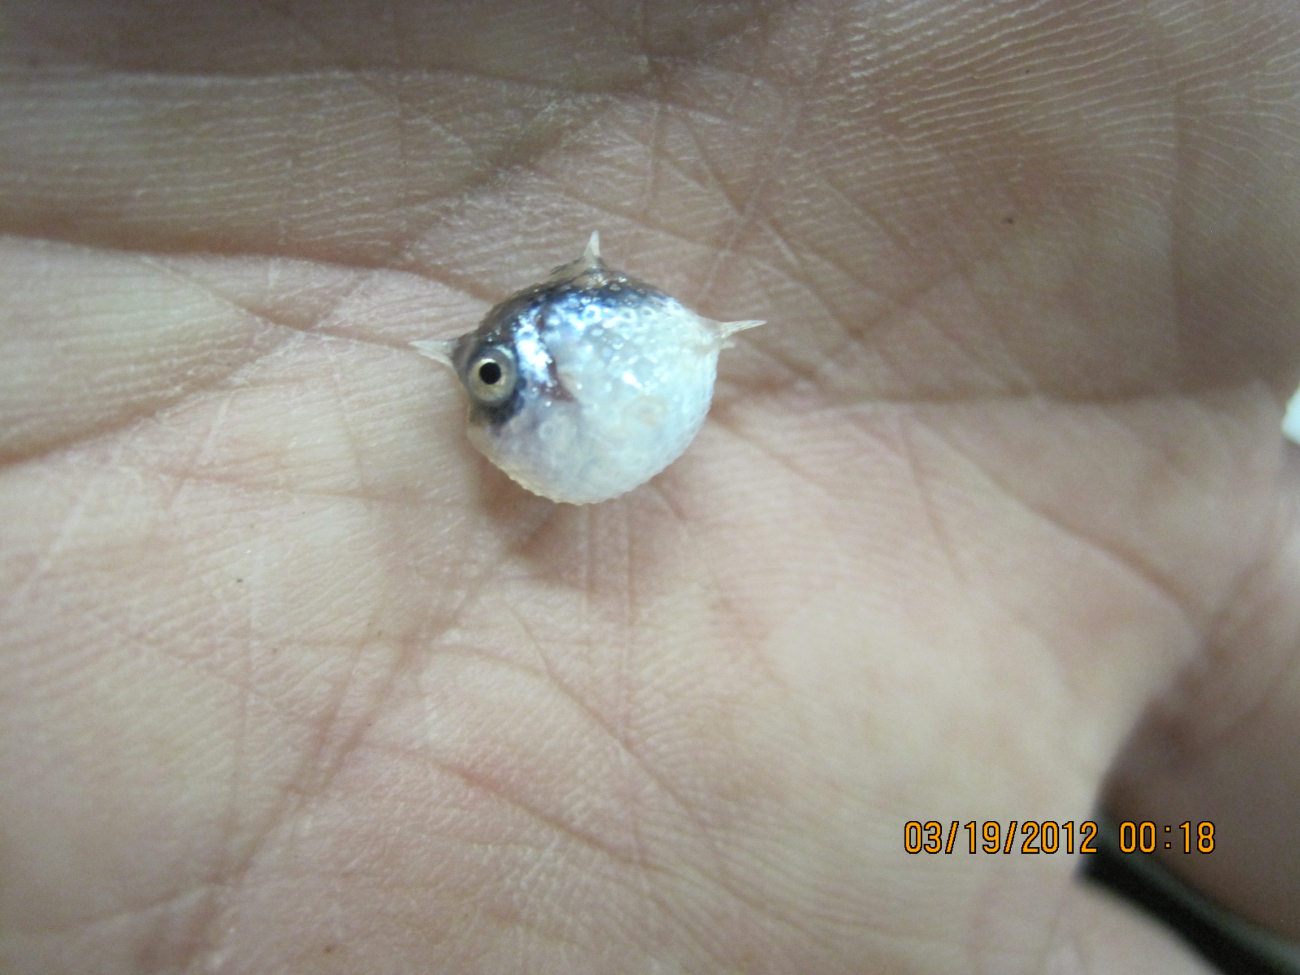 Small puffer-like fish captured in plankton tow